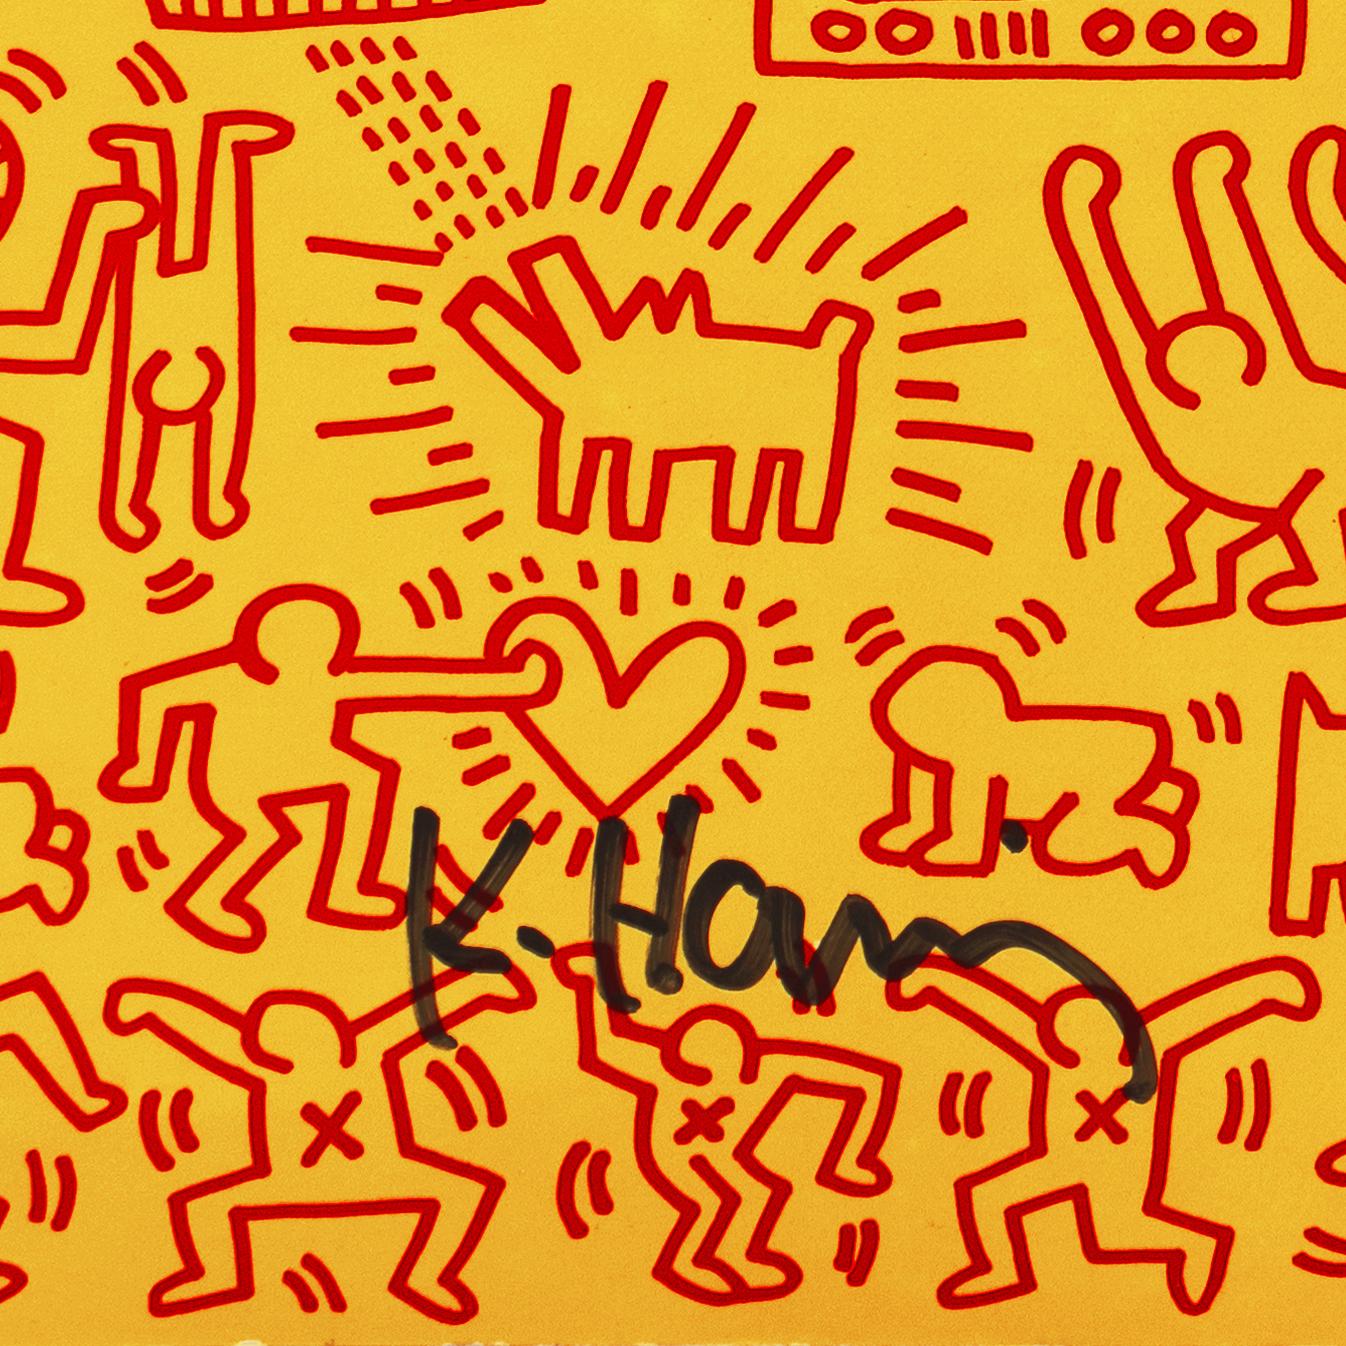 Hand signed by the artist in felt pen, lower center, 'K. Haring' for Keith Haring (American, 1958-1990), circa 1984. The inside cover of 'Art in Transit: Subway Drawings' by Keith Haring and Tseng Kwong Chi, published by Harmony Books, 1984.

One of